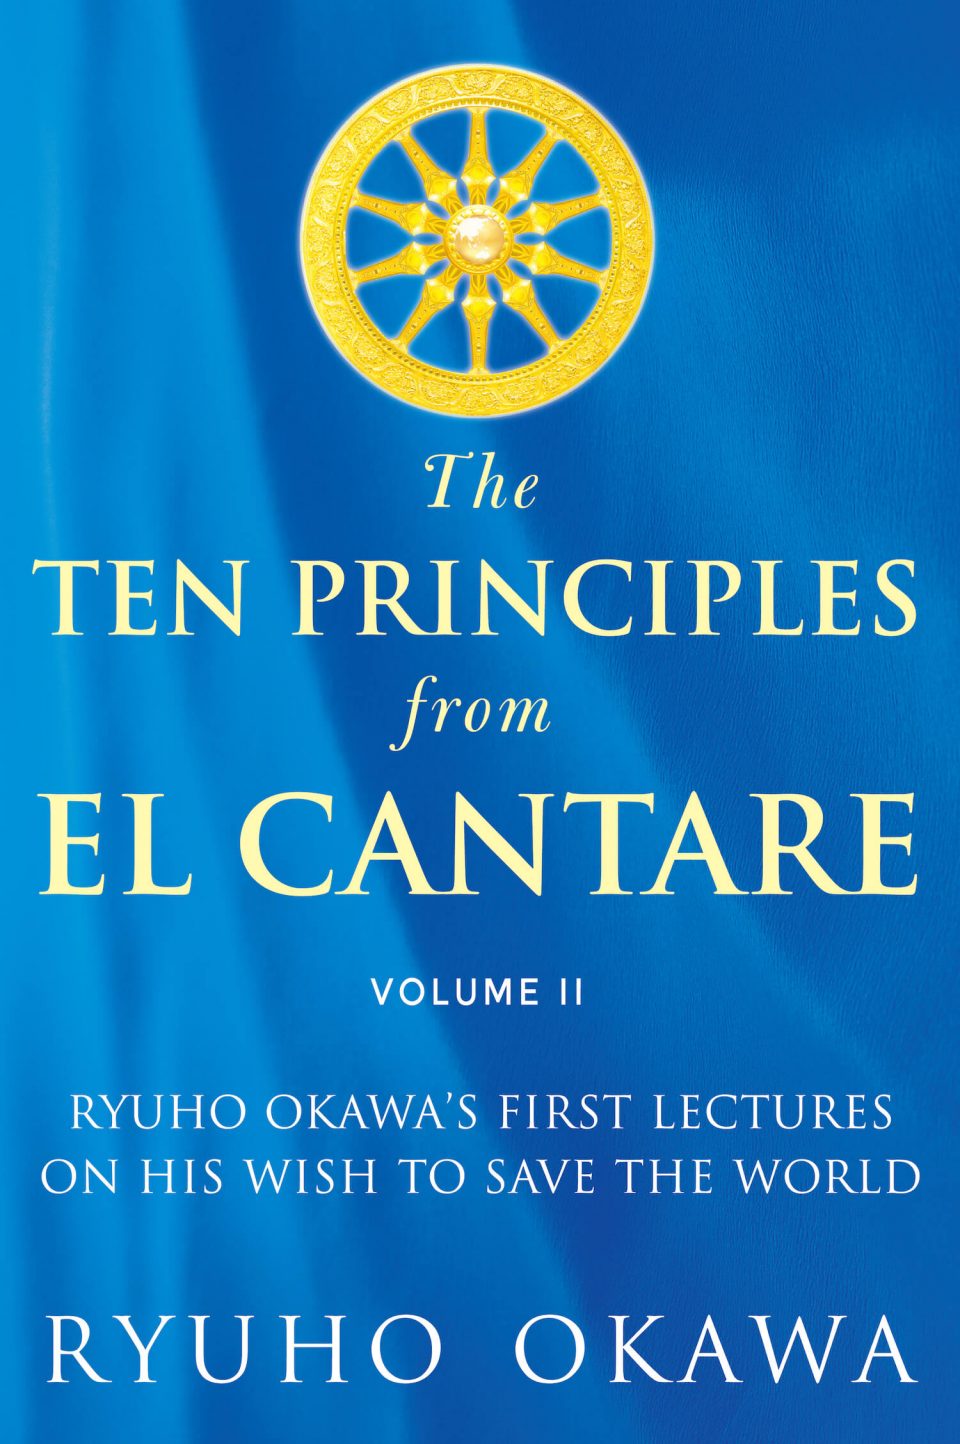 The Ten Principles from El Cantare: Ryuho Okawa’s First Lectures on His Wish to Save the World (Volume II) is out now!